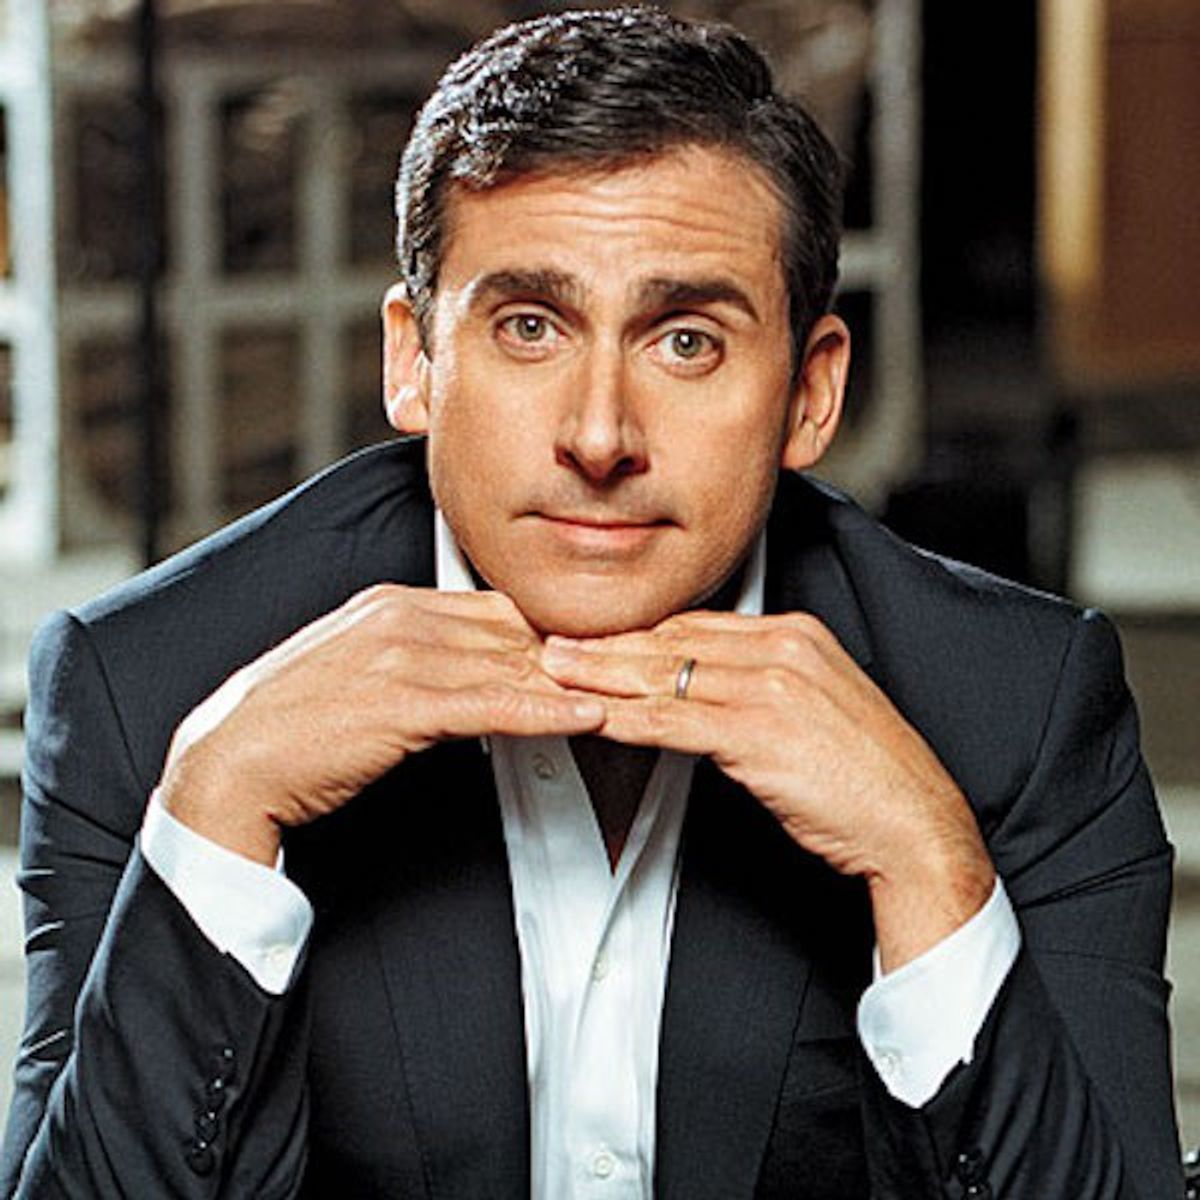 20 Steve Carell Quotes That Relate To Your Life